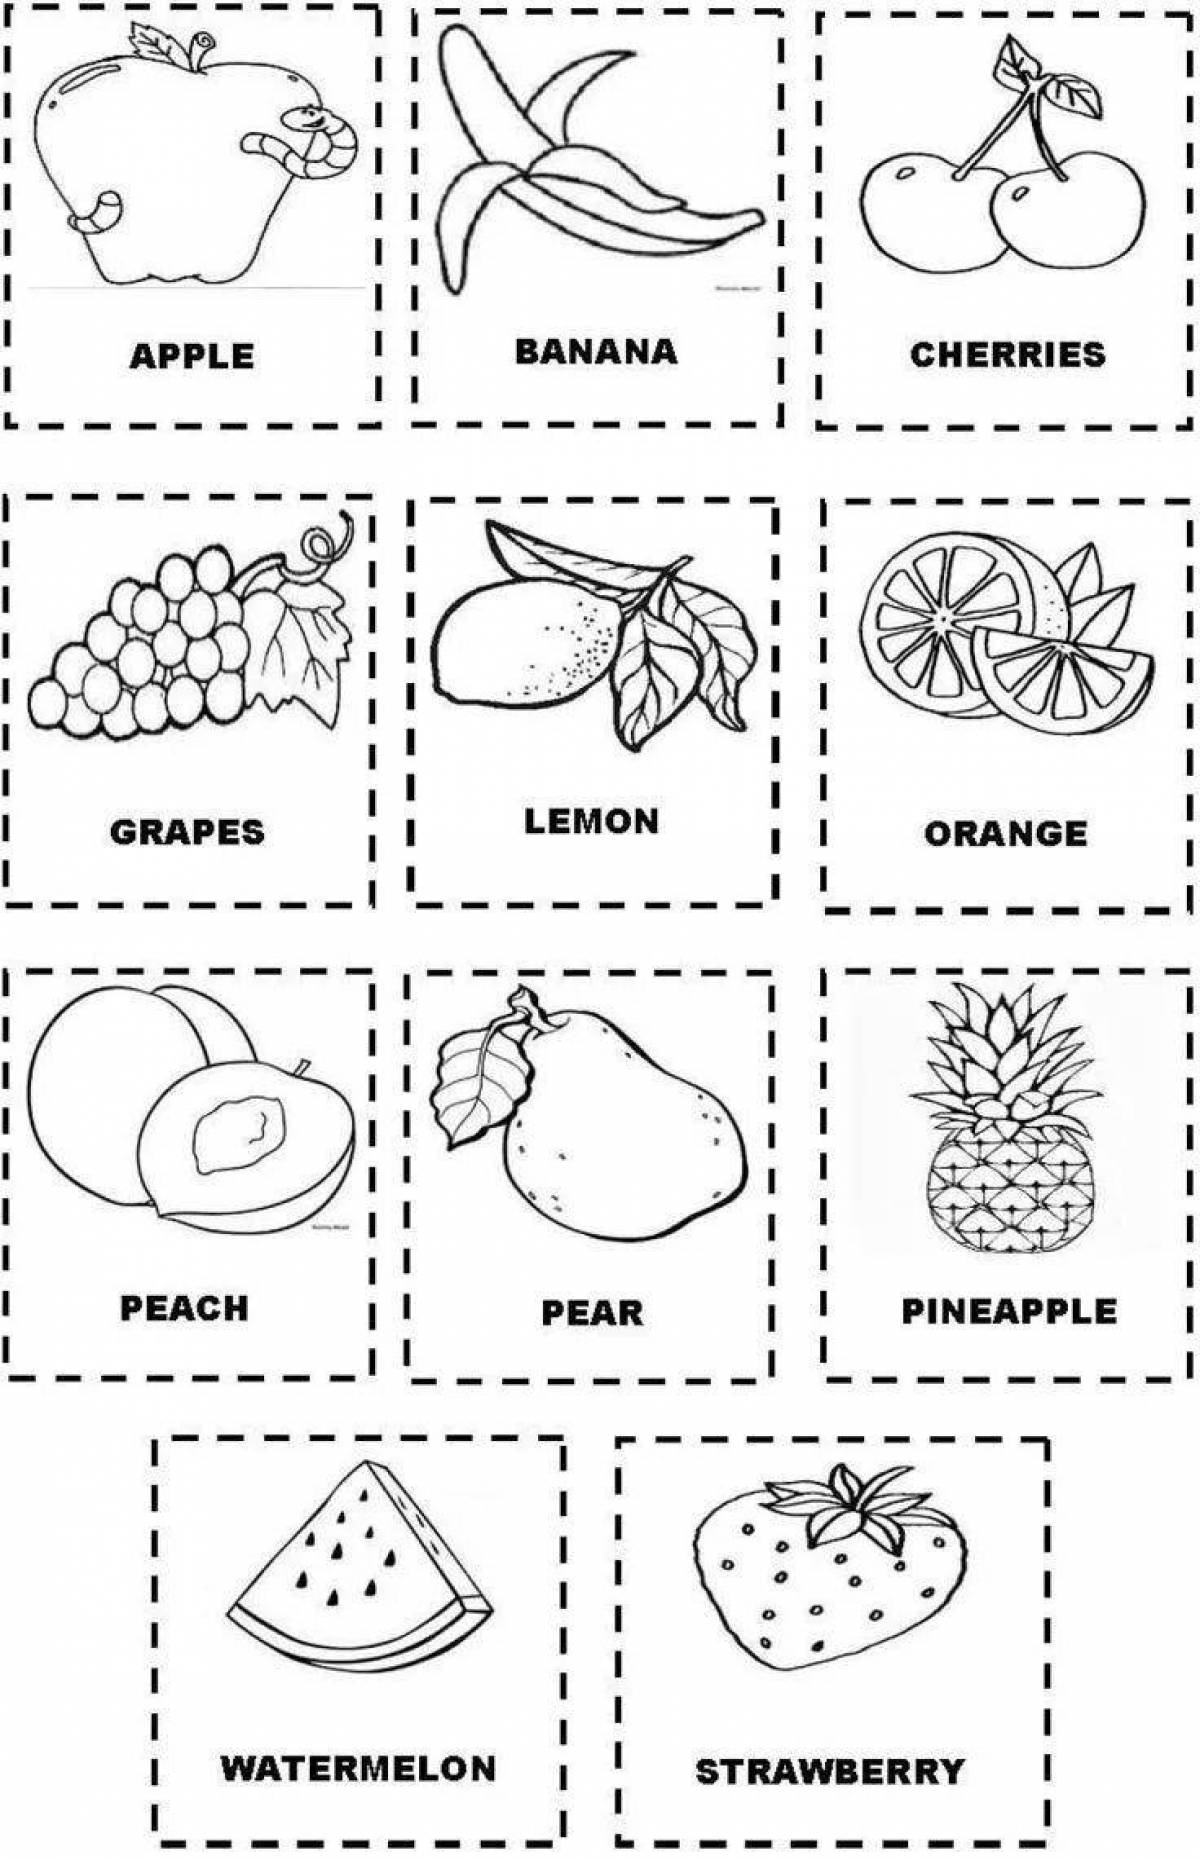 Coloring for colorful fruits